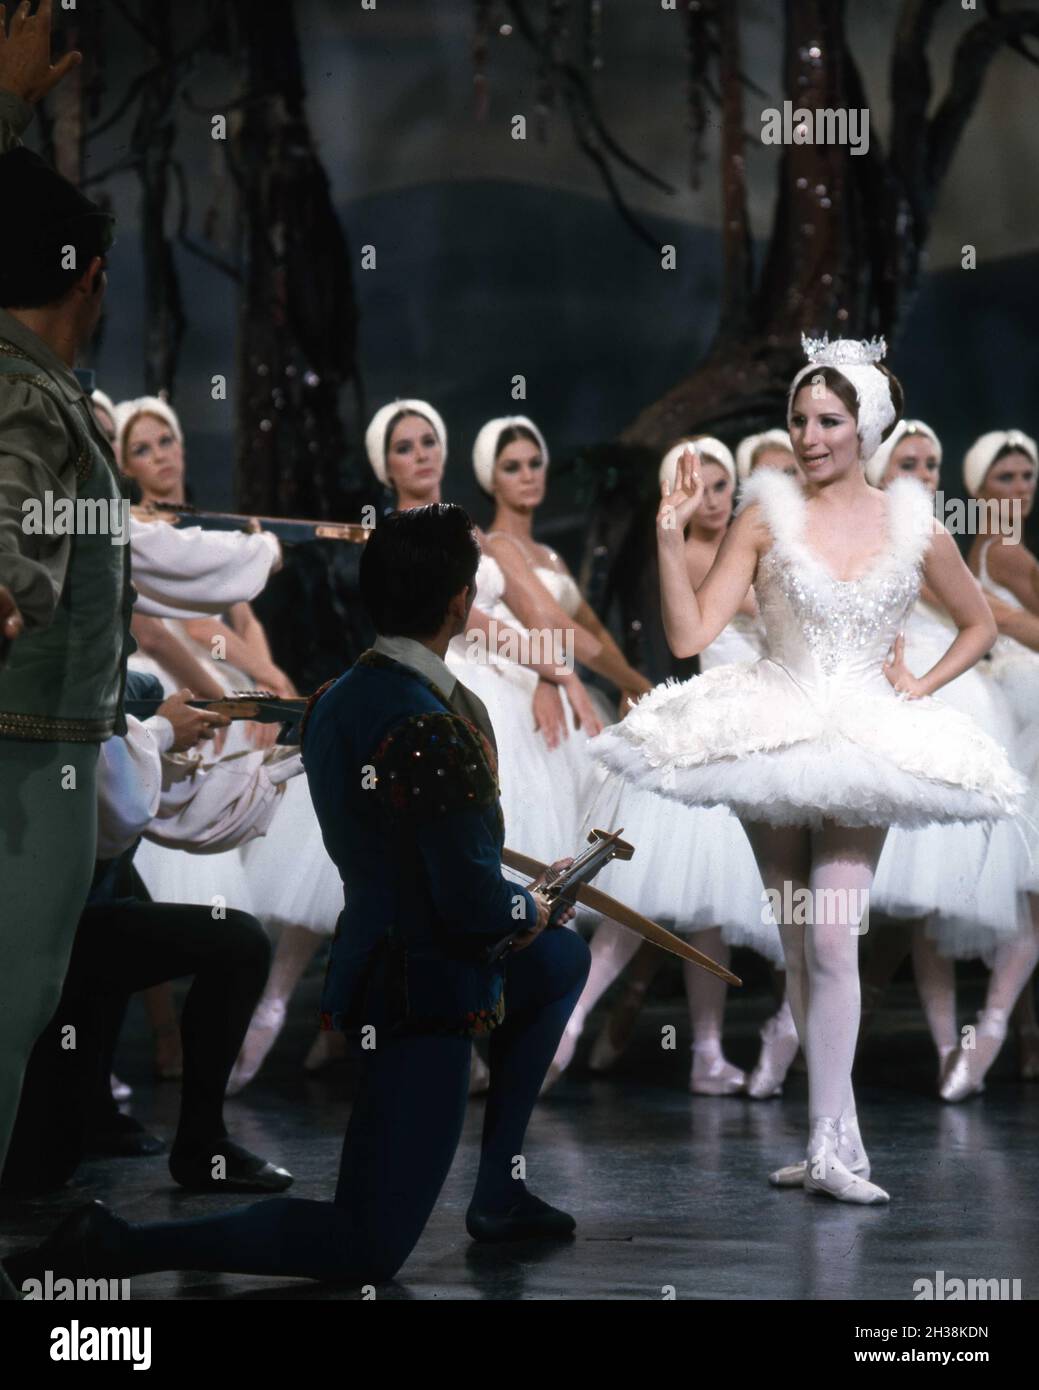 TOMMY RALL and BARBRA STREISAND as Fanny Brice with ballet Dancers in Swan  Lake Parody in FUNNY GIRL 1968 director WILLIAM WYLER musical play /  screenplay Isobel Lennart music Jule Styne lyrics